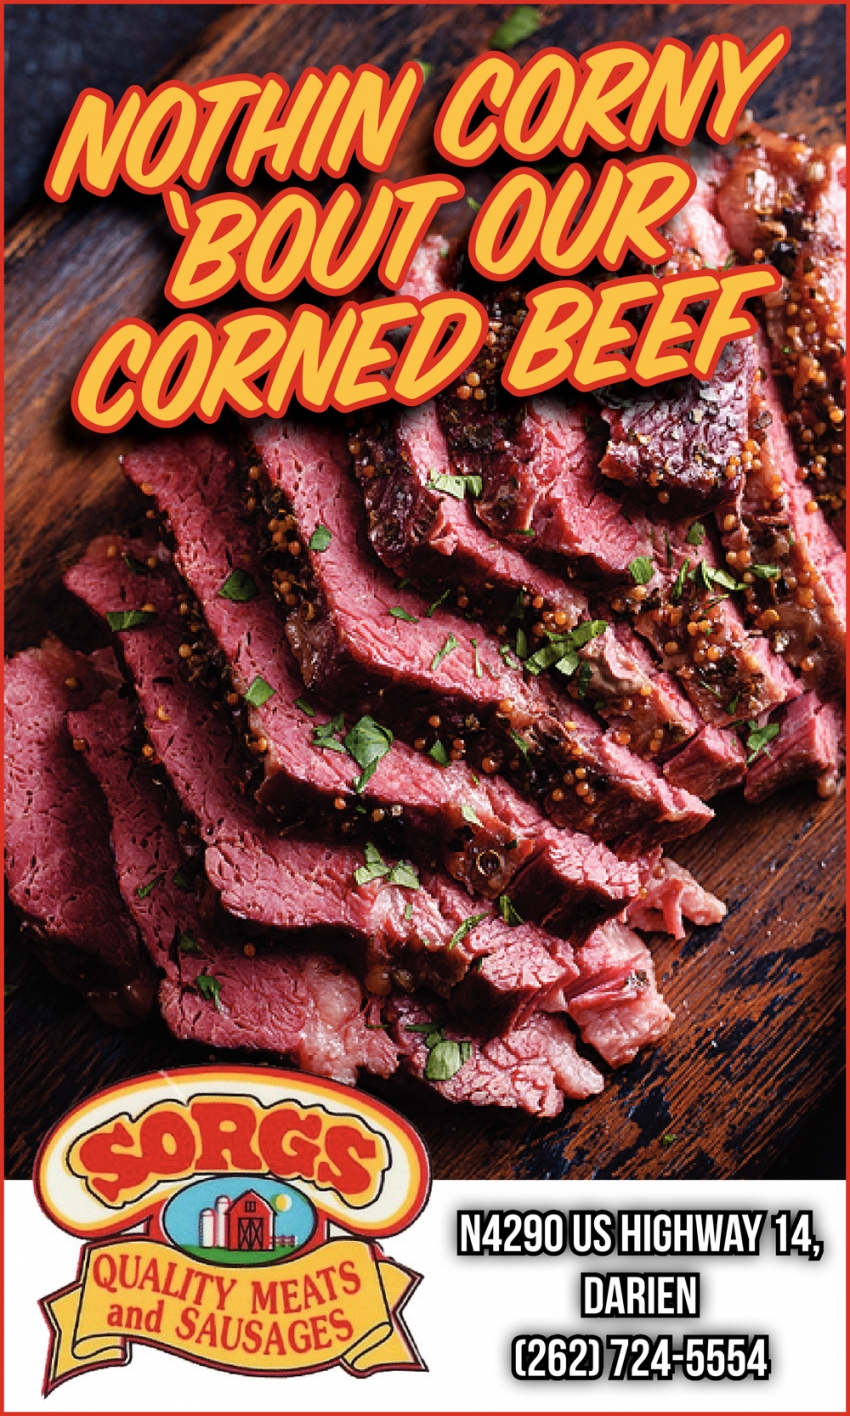 Nothin Corny 'Bout Our Corned Beef